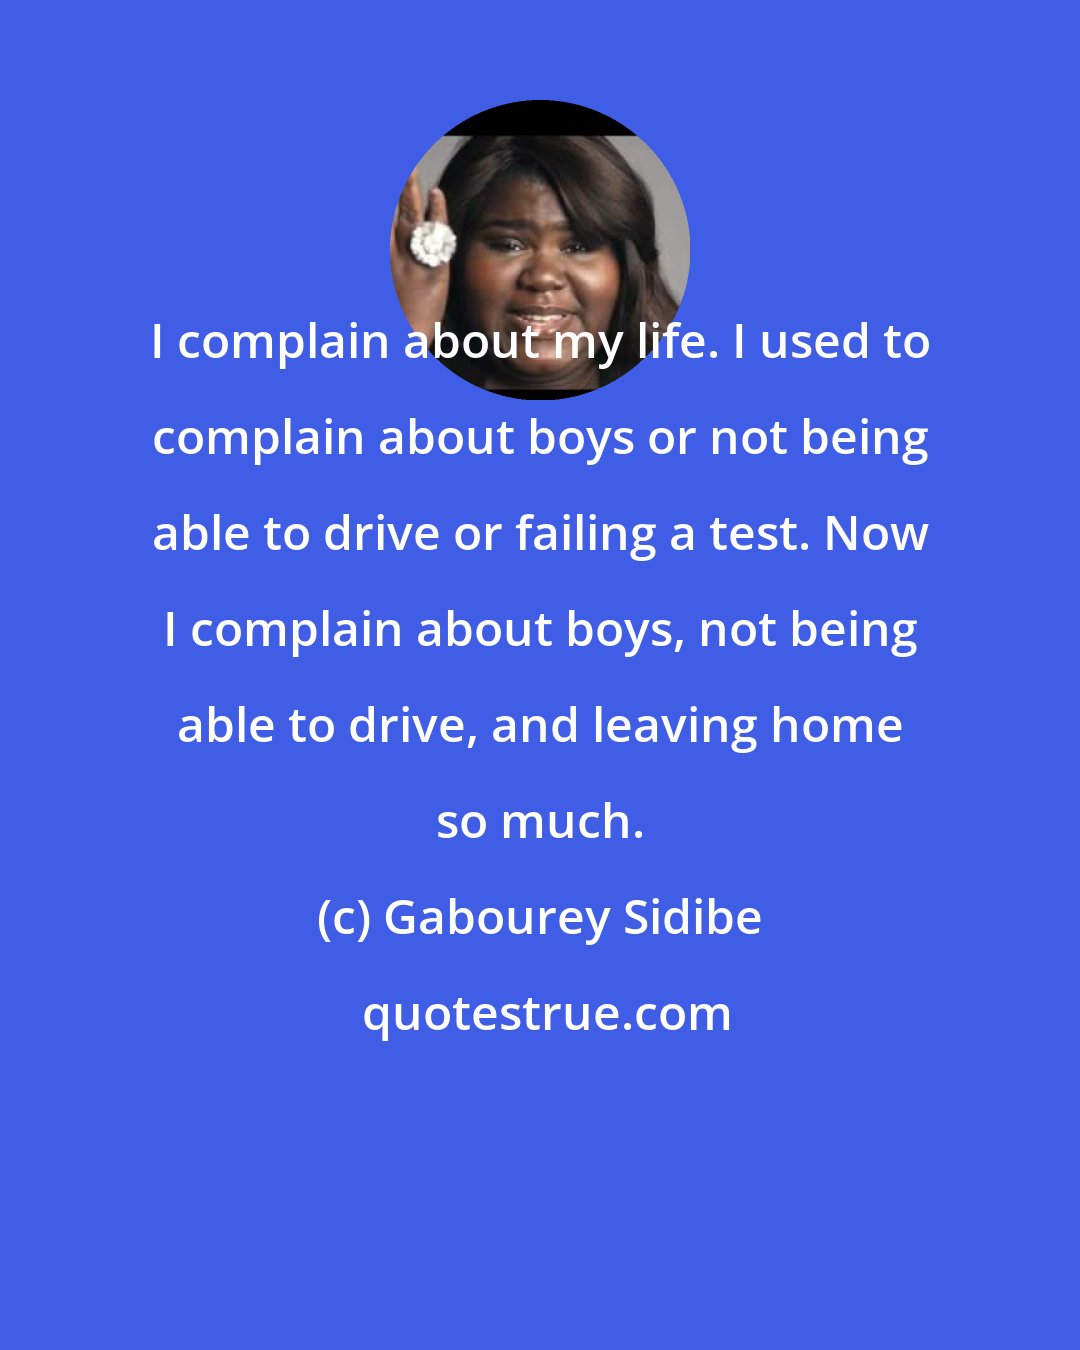 Gabourey Sidibe: I complain about my life. I used to complain about boys or not being able to drive or failing a test. Now I complain about boys, not being able to drive, and leaving home so much.